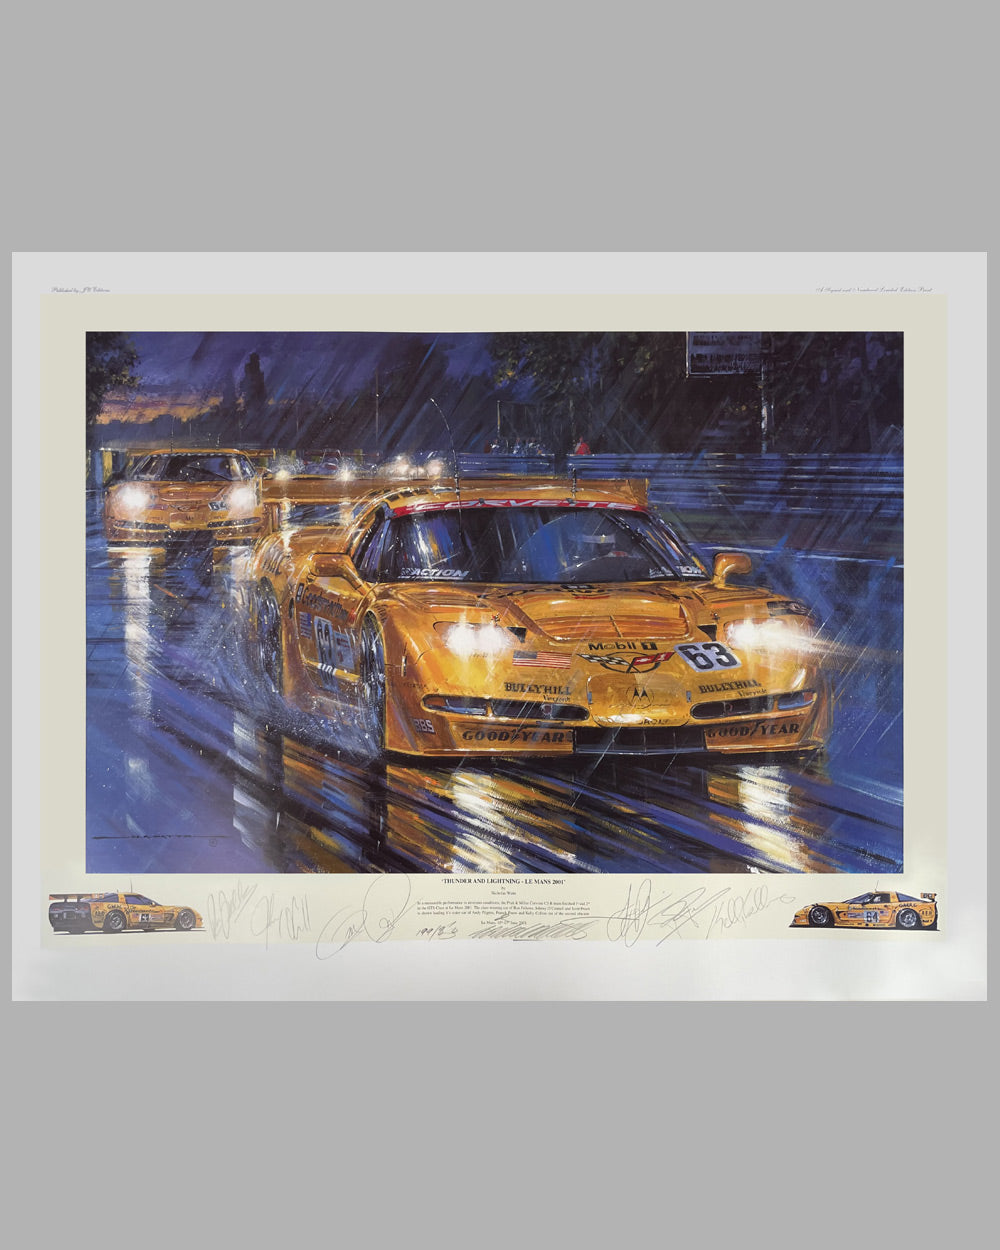 Thunder & Lightning – Le Mans 2001 print by Nicholas Watts, autographed by 6 drivers